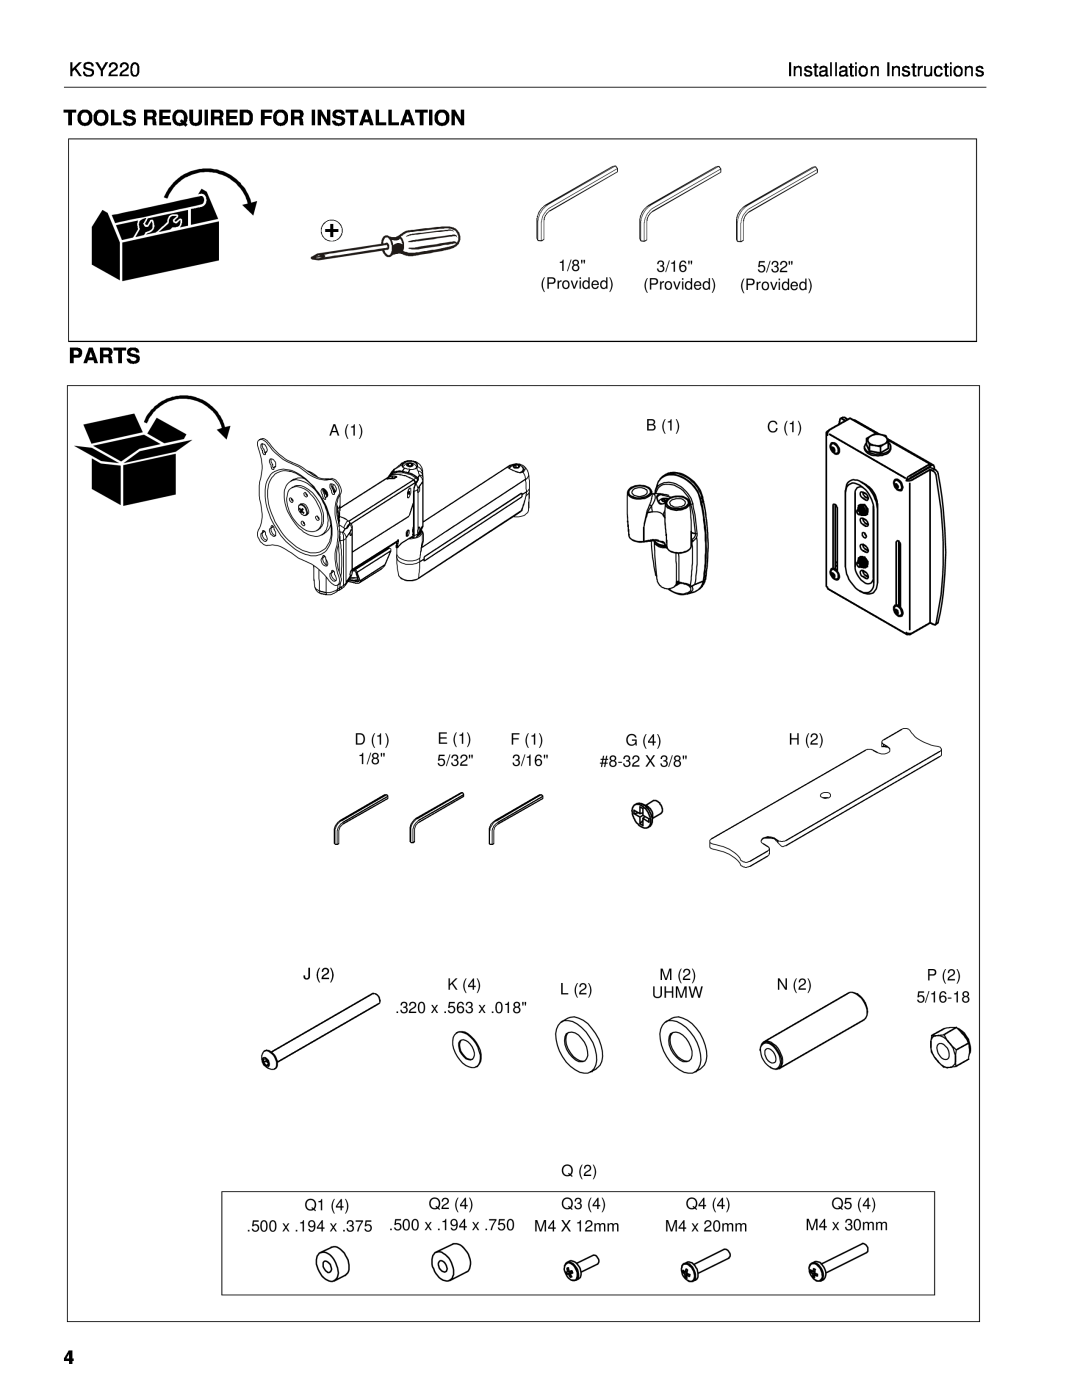 Chief Manufacturing KSY220 installation instructions Tools Required For Installation, Parts, Installation Instructions 